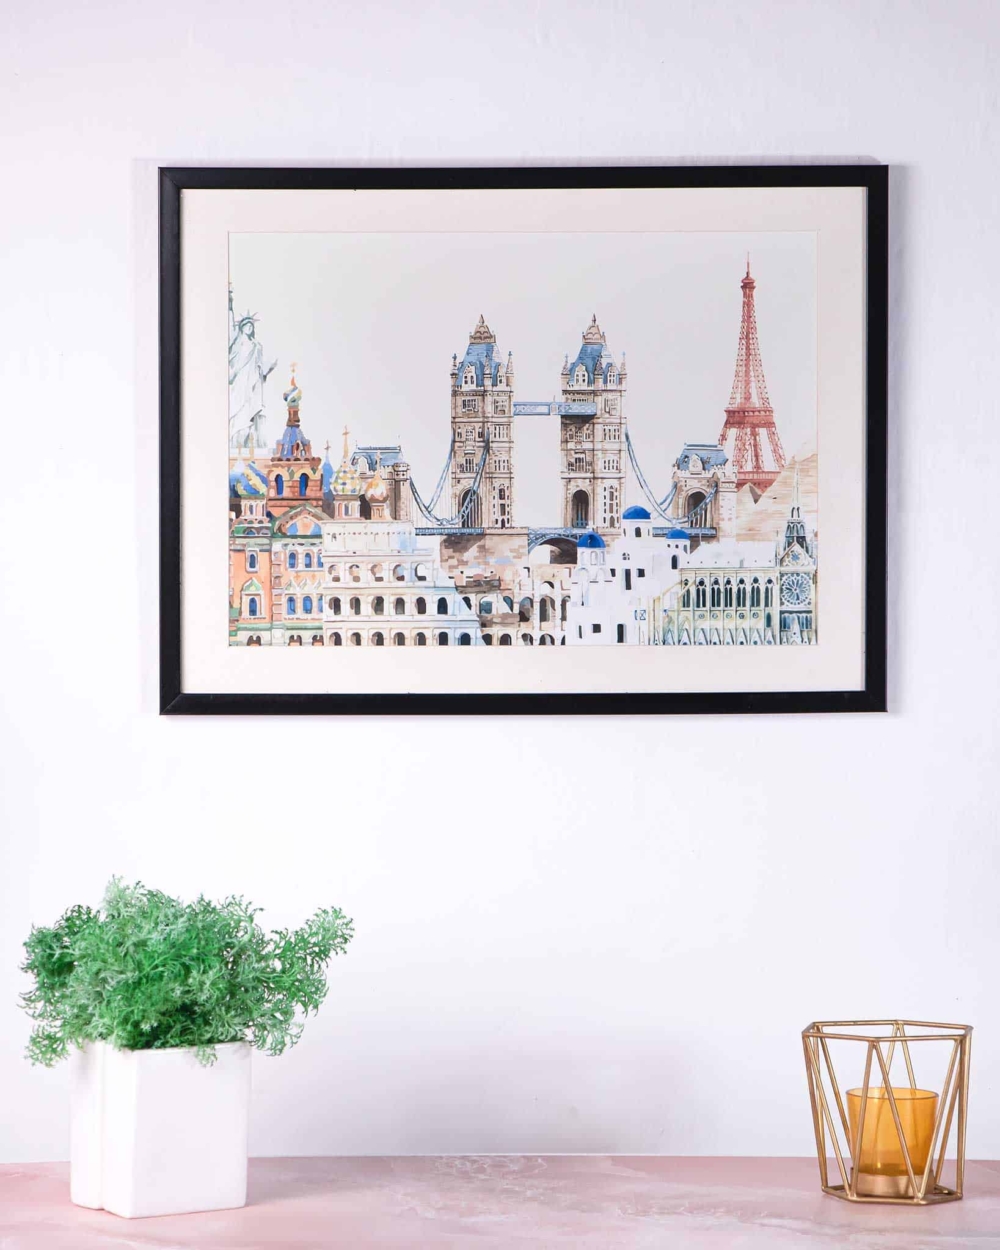 Historical place illustration wooden frame wall decor